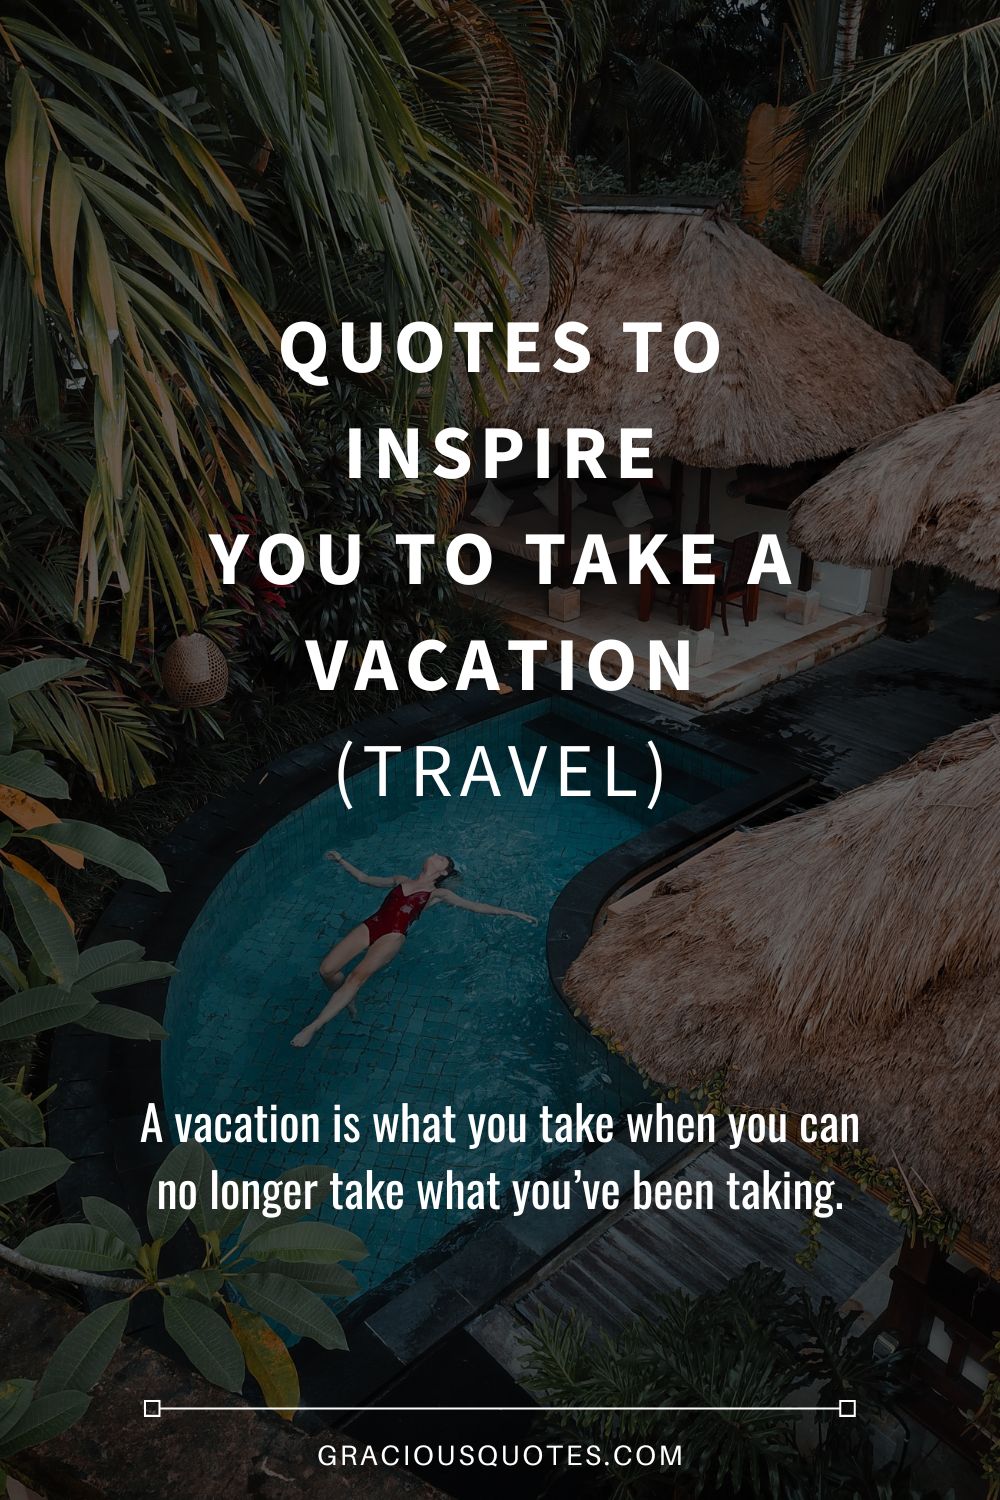 Quotes to Inspire You to Take a Vacation (TRAVEL) - Gracious Quotes